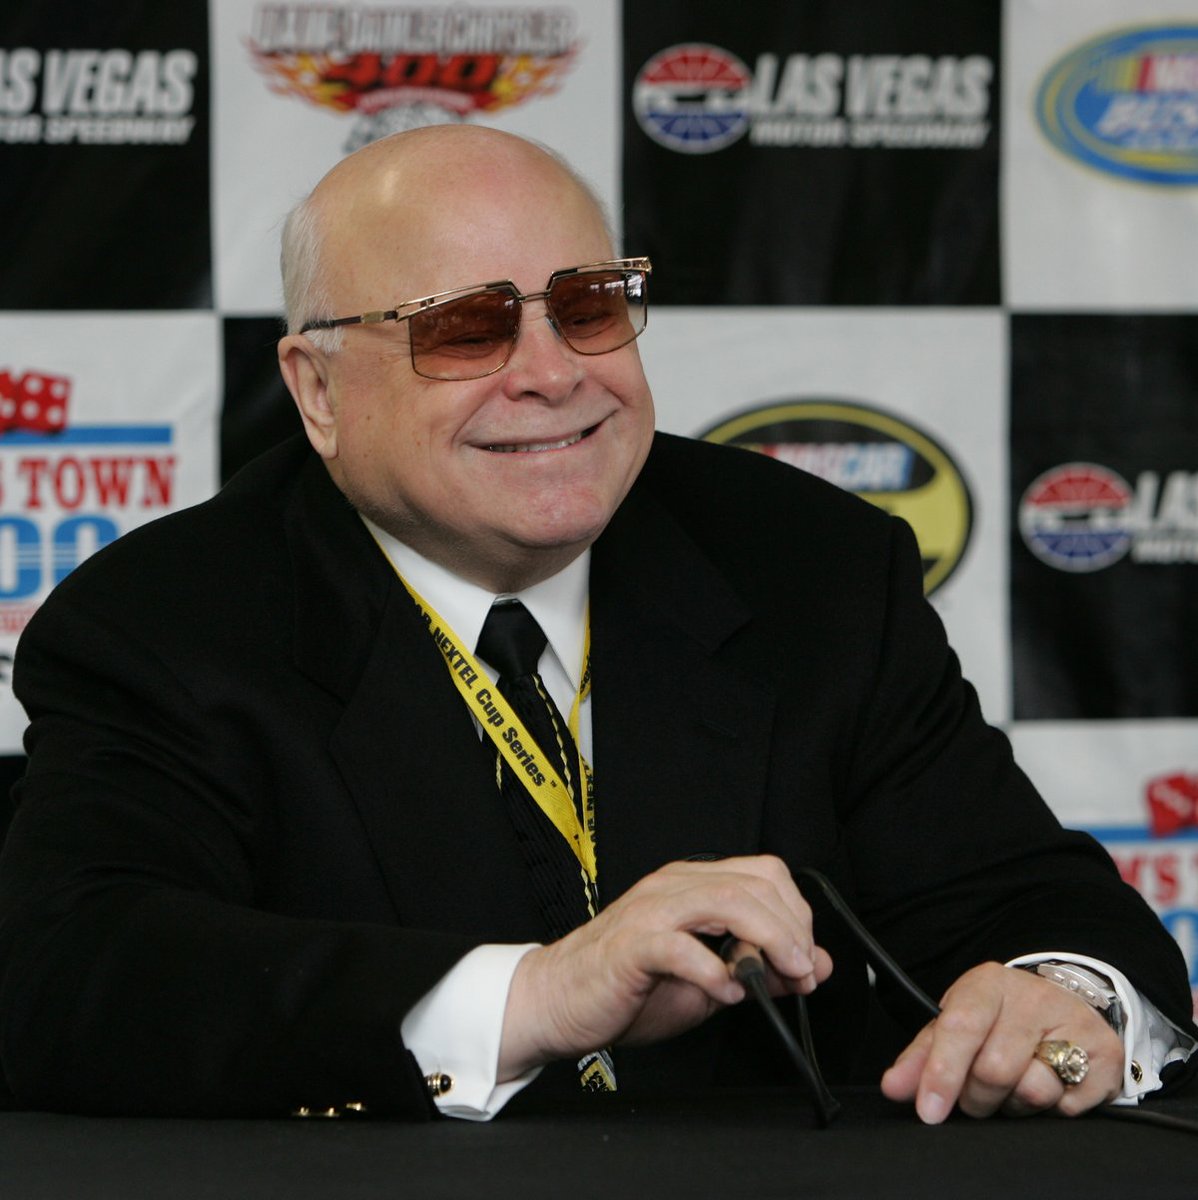 Today, we celebrate Bruton Smith, one of NASCAR’s most legendary figures and the founder of Sonic Automotive, EchoPark Automotive, Speedway Motorsports, and Speedway Children’s Charities. His legacy reminds all our teammates of the profound impact one person can have.